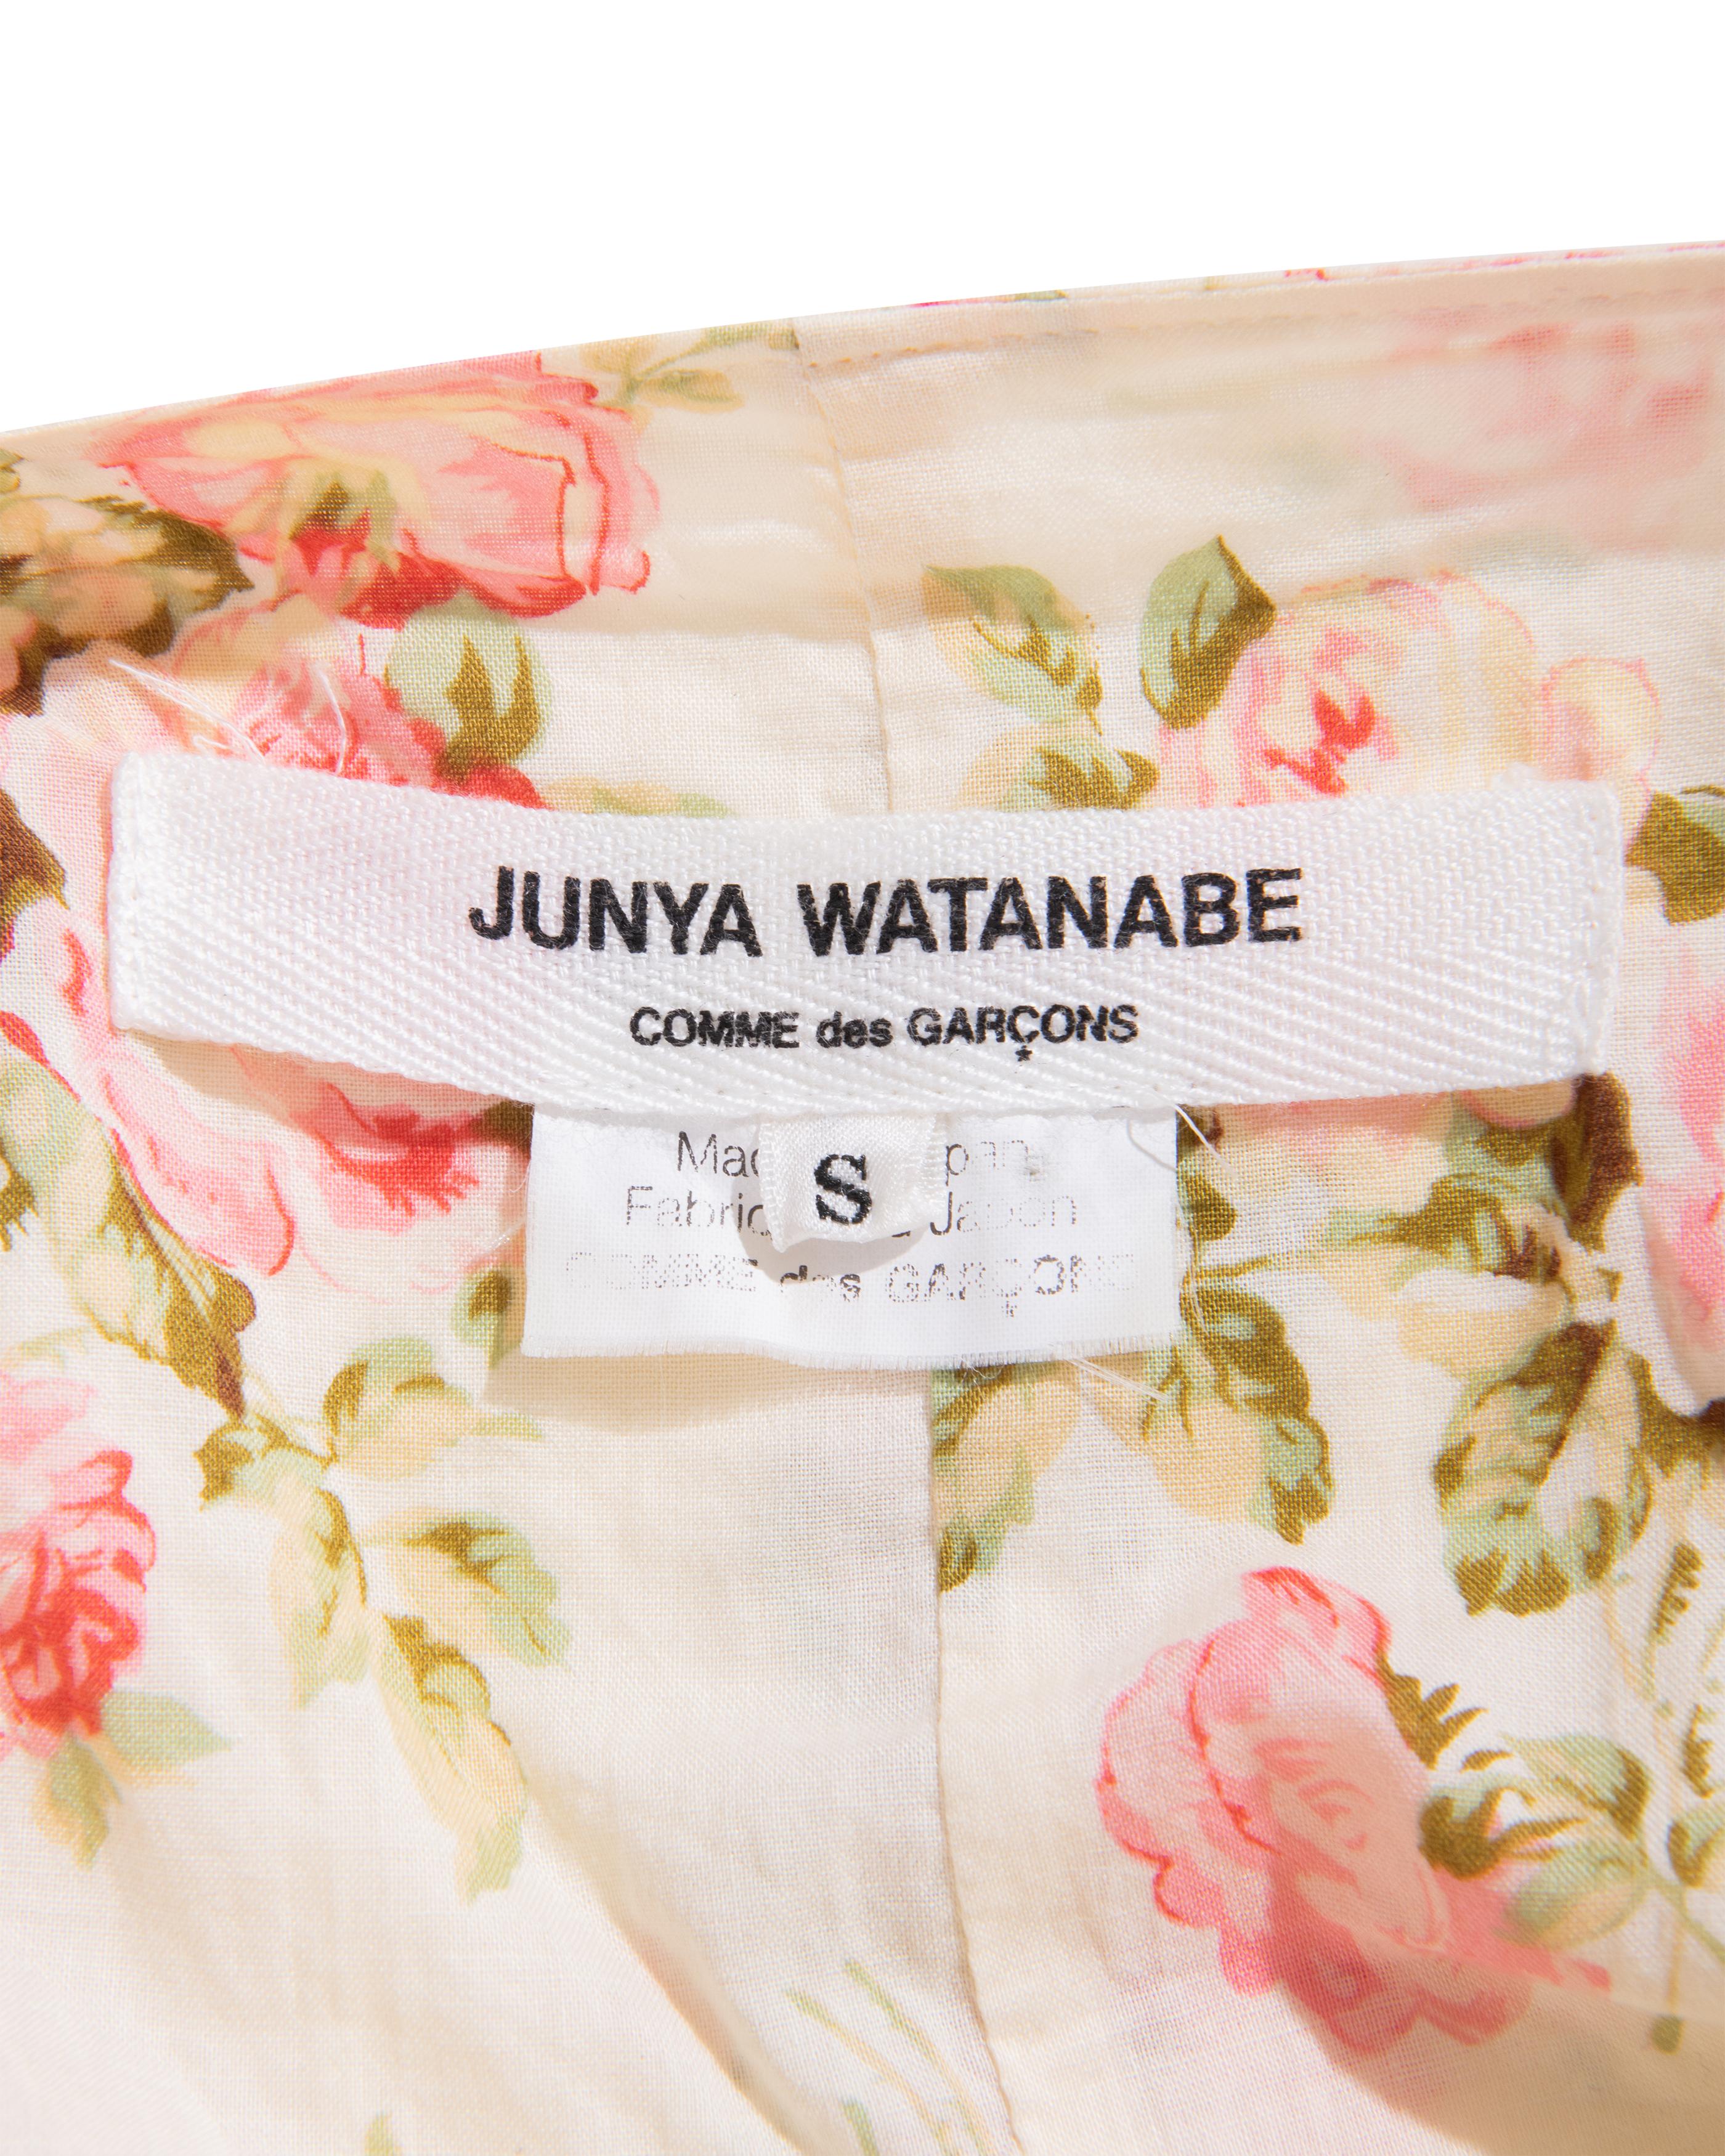 S/S 2008 Junya Watanabe Ecru Cotton Dress with Pink Floral Pattern For Sale 6